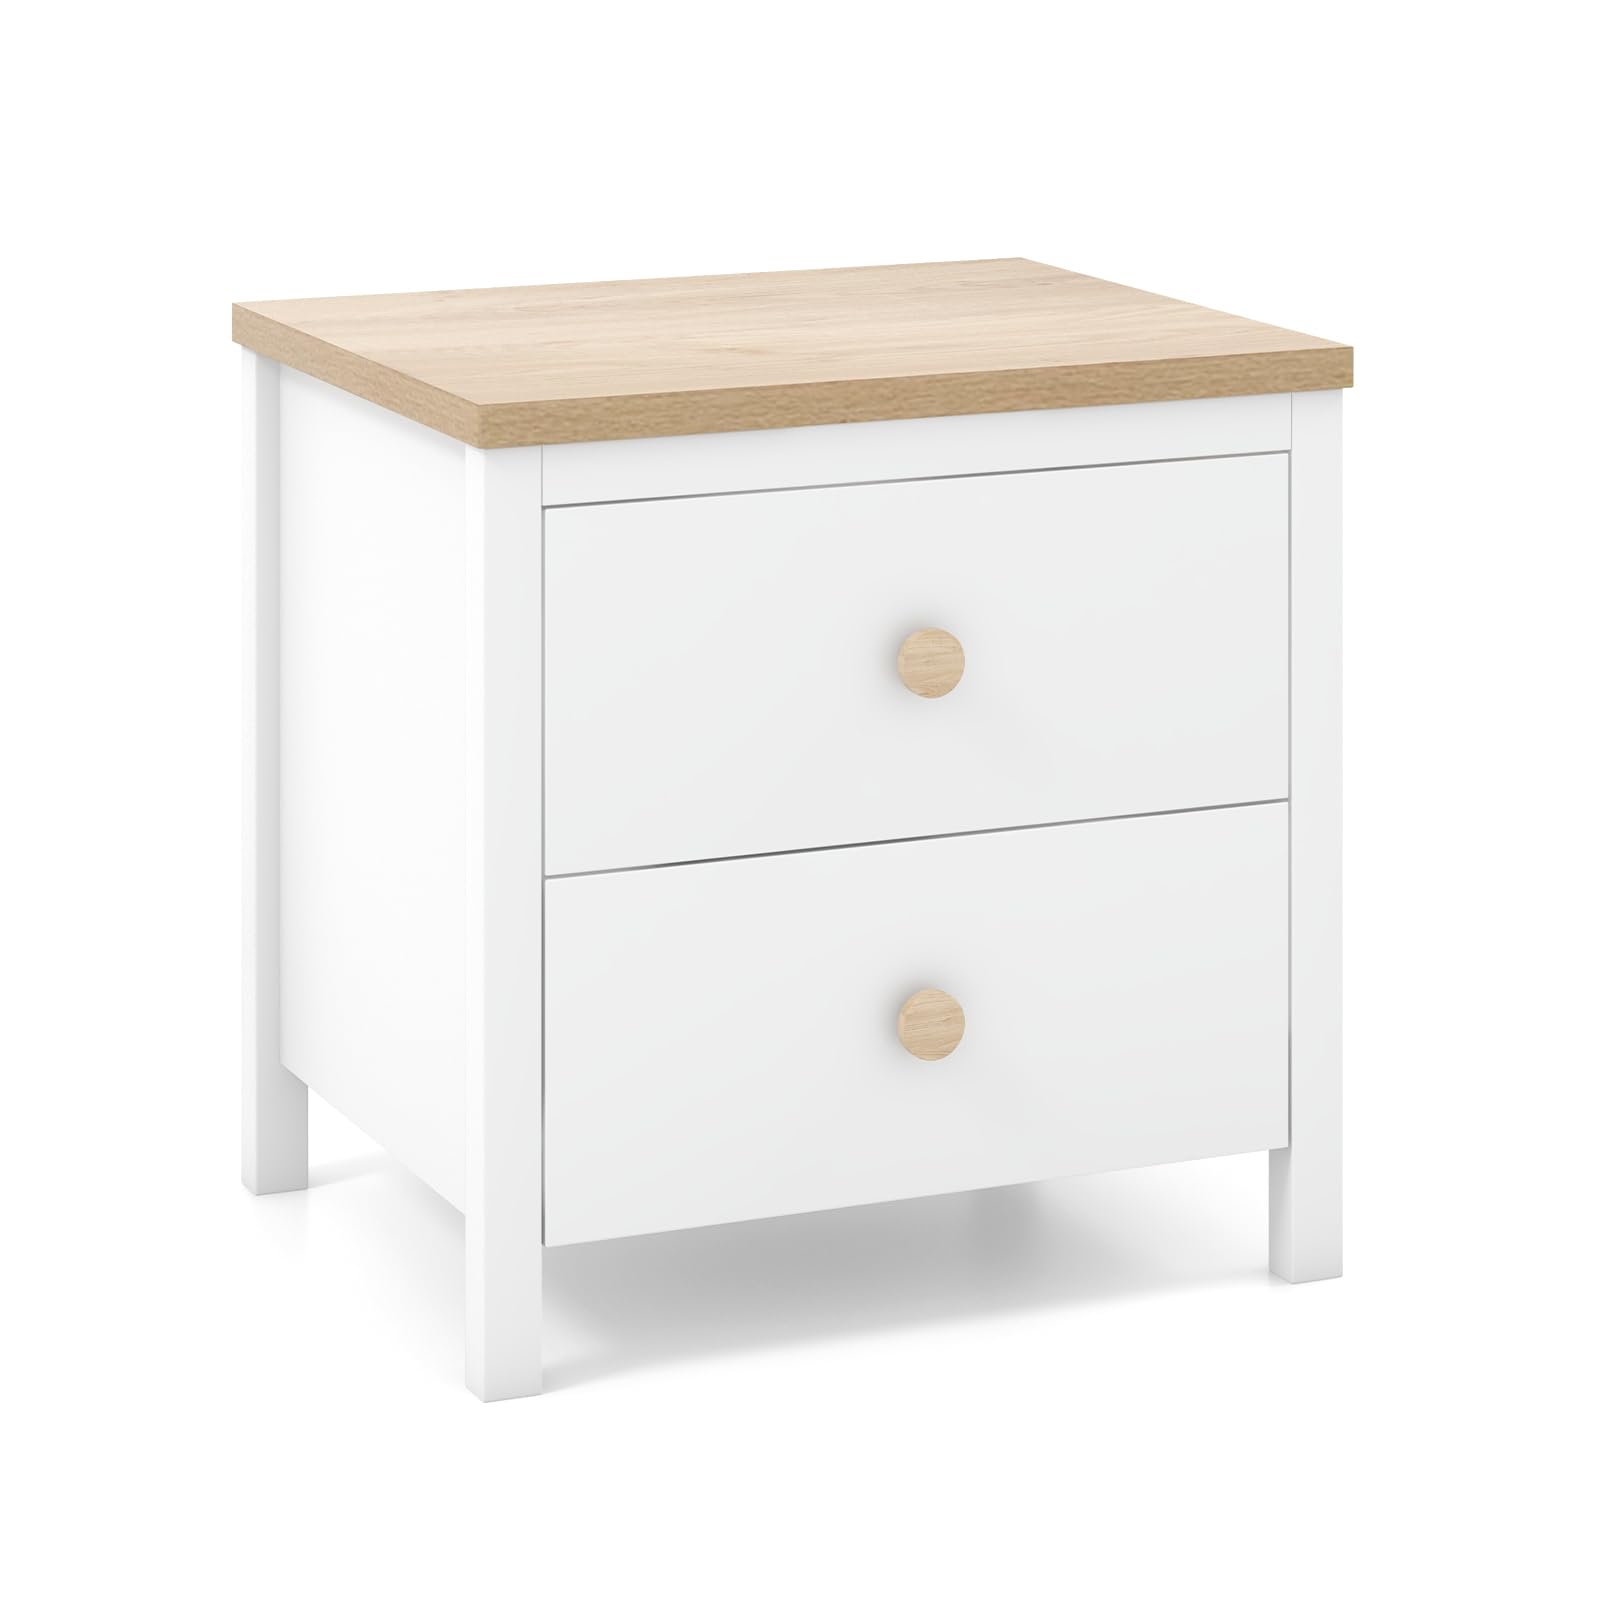 Giantex Night Stand with 2 Drawers, Farmhouse Bedside Table with Cute Round Knobs